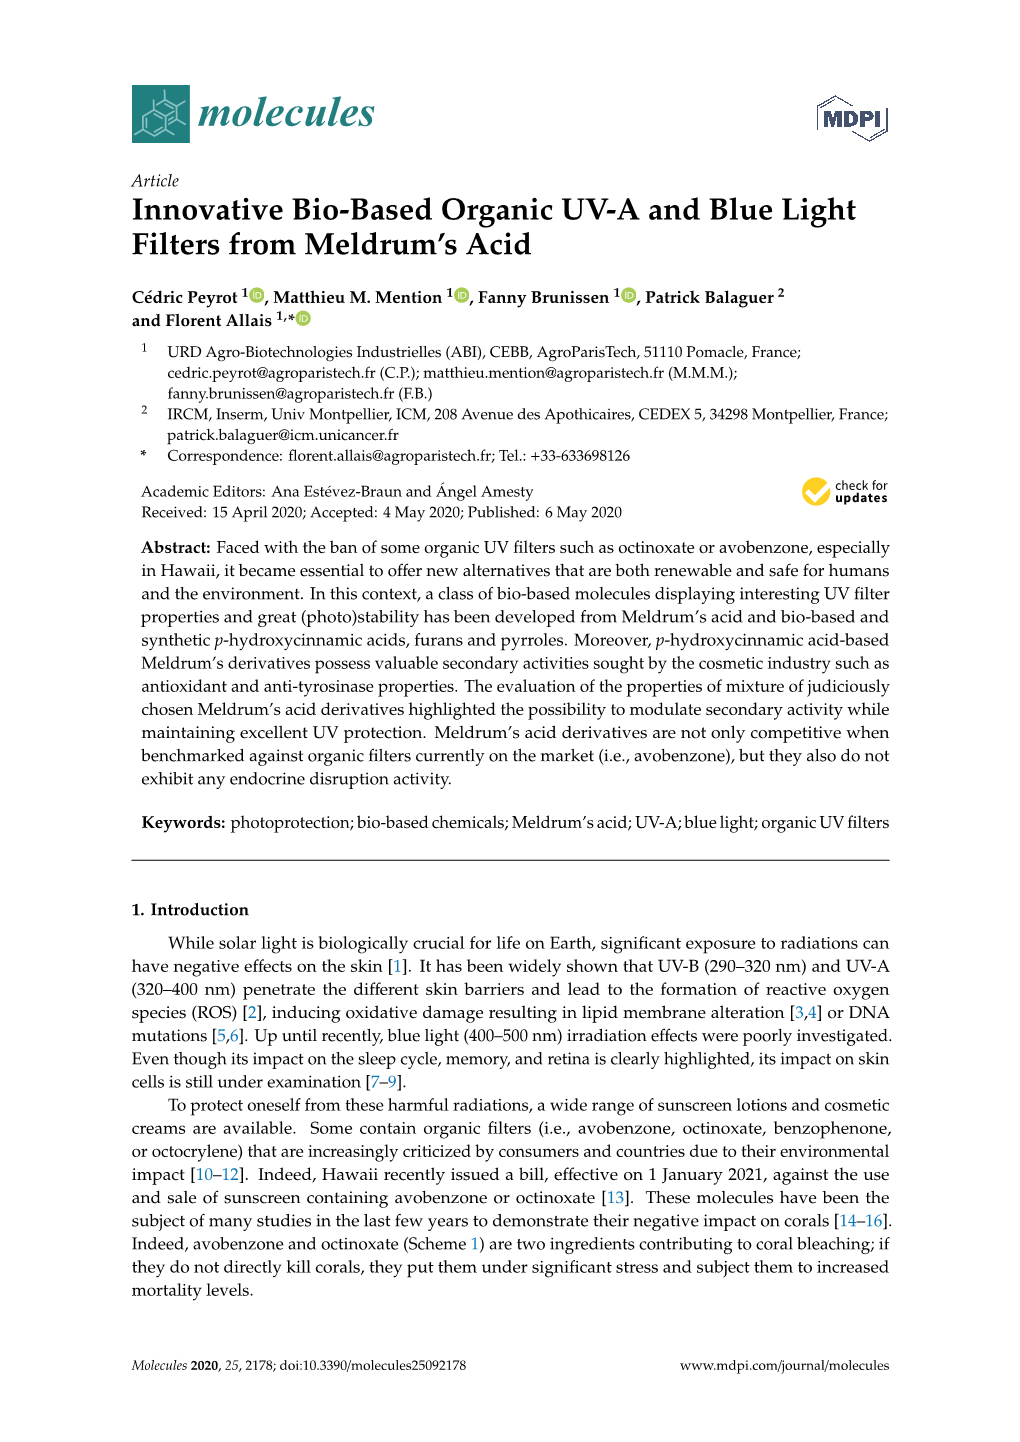 Innovative Bio-Based Organic UV-A and Blue Light Filters from Meldrum’S Acid